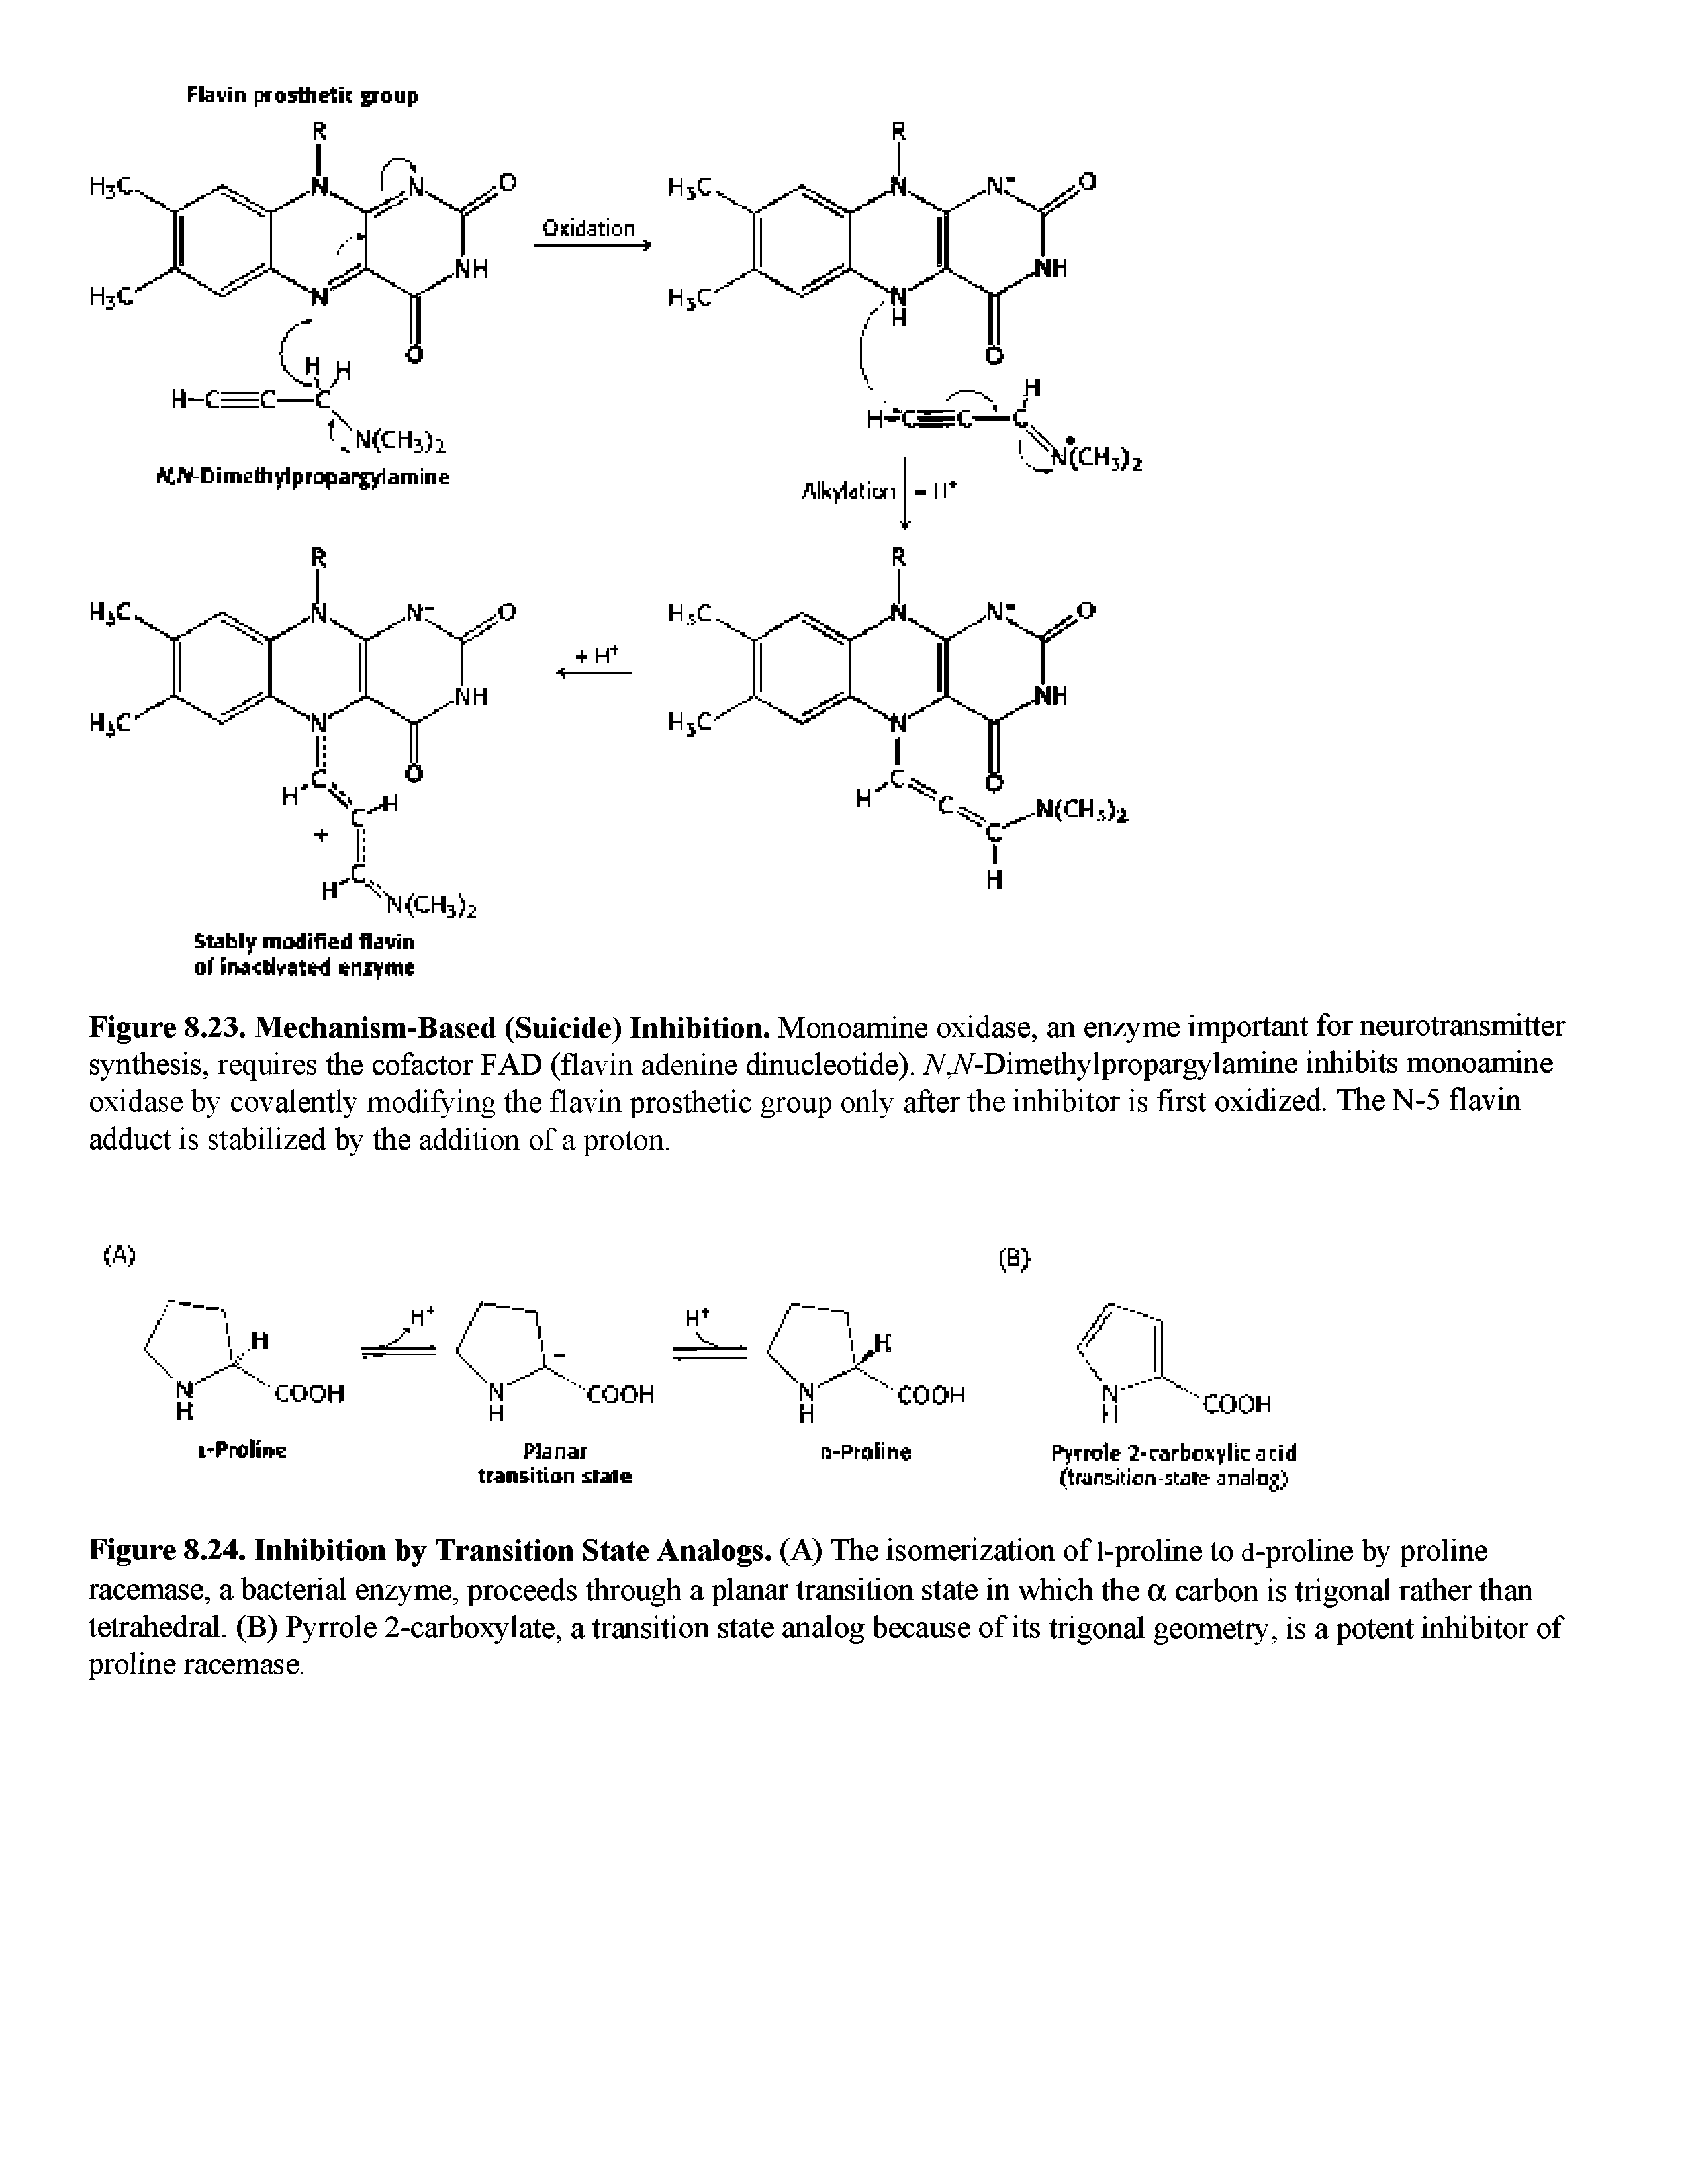 Figure 8.24. Inhibition by Transition State Analogs. (A) The isomerization of 1-proline to d-proline by proline racemase, a bacterial enzyme, proceeds through a planar transition state in which the a carbon is trigonal rather than tetrahedral. (B) Pyrrole 2-carboxylate, a transition state analog because of its trigonal geometry, is a potent inhibitor of proline racemase.